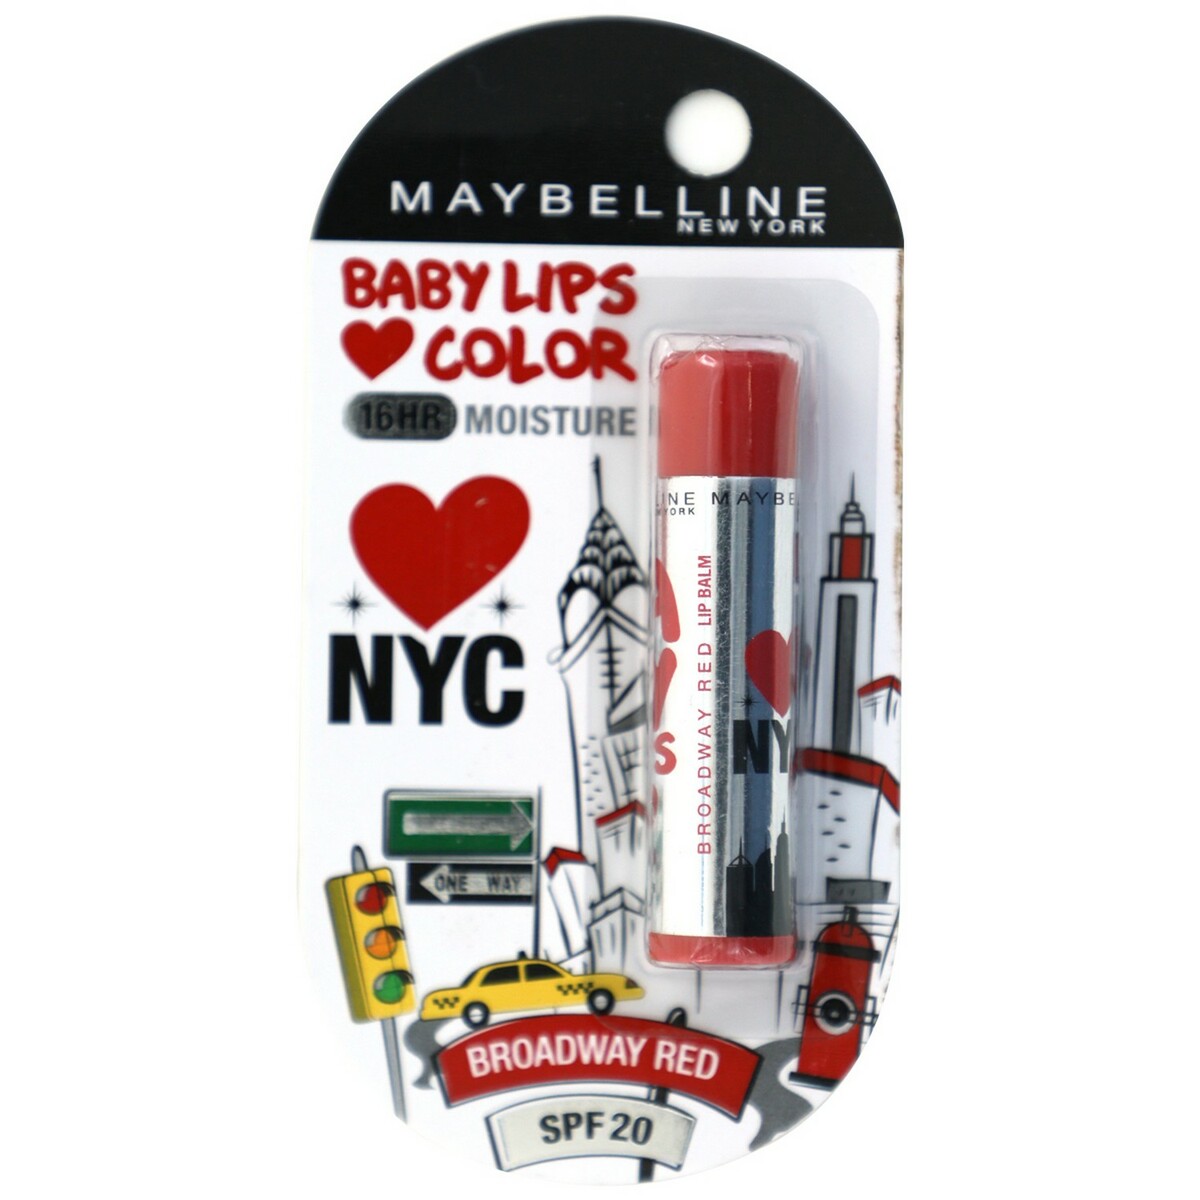 Maybelline Baby Lips Alia Loves Broadway Red 4g